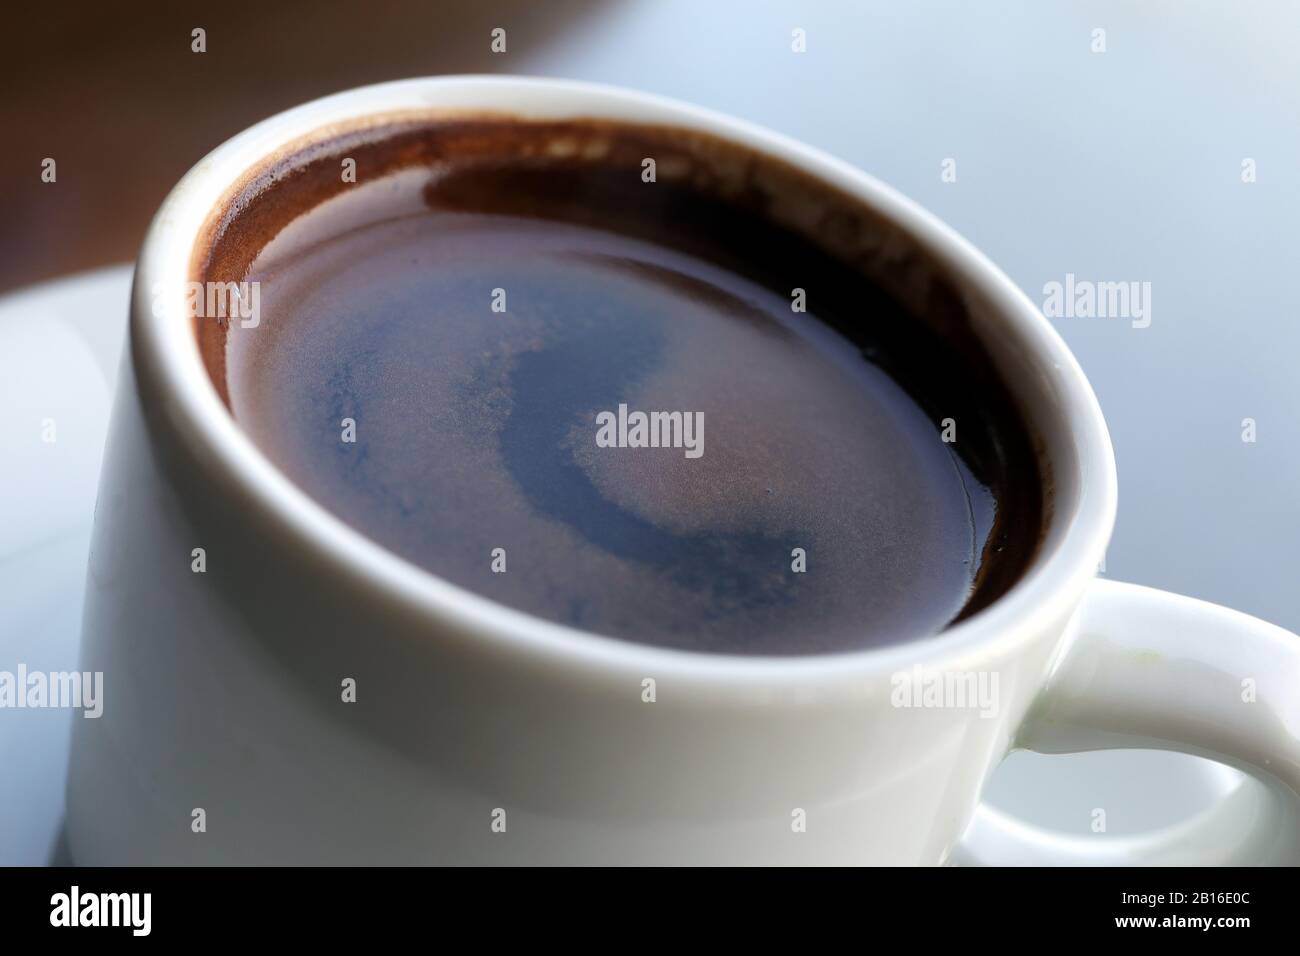 Close-up of Turkish coffee in white ceramic cup Stock Photo